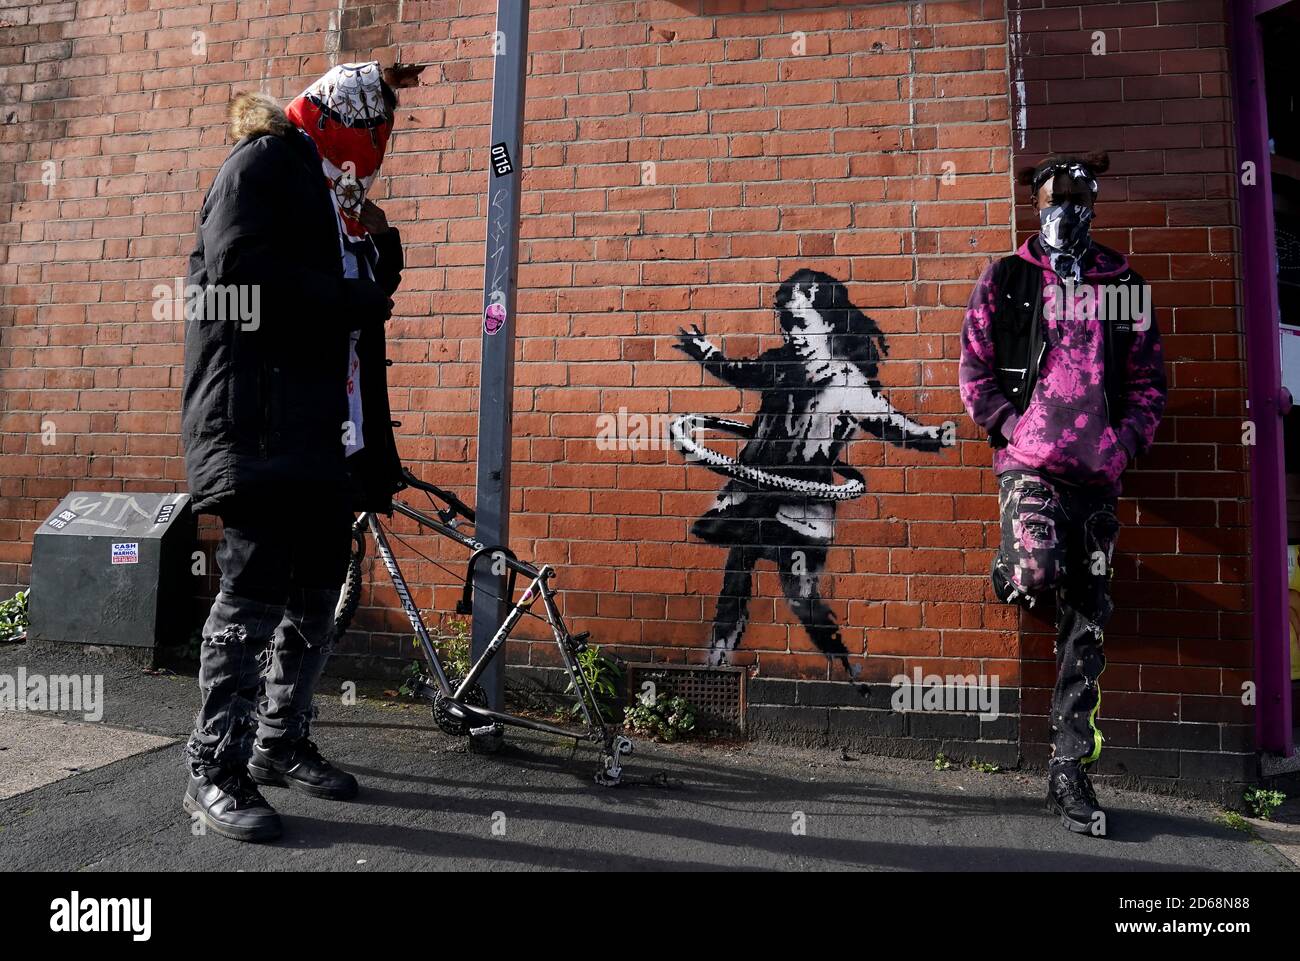 Nottingham residents Paris Hendrix (left) and Phidizz next to graffiti artwork, now confirmed to be the work of street artist Banksy, on a side of a property at Rothesay AVenue and Ilkeston Road, Nottingham. The artwork depicts a young girl playing with a tyre and is painted on a wall near to an abandoned bicycle that is missing a wheel. Stock Photo